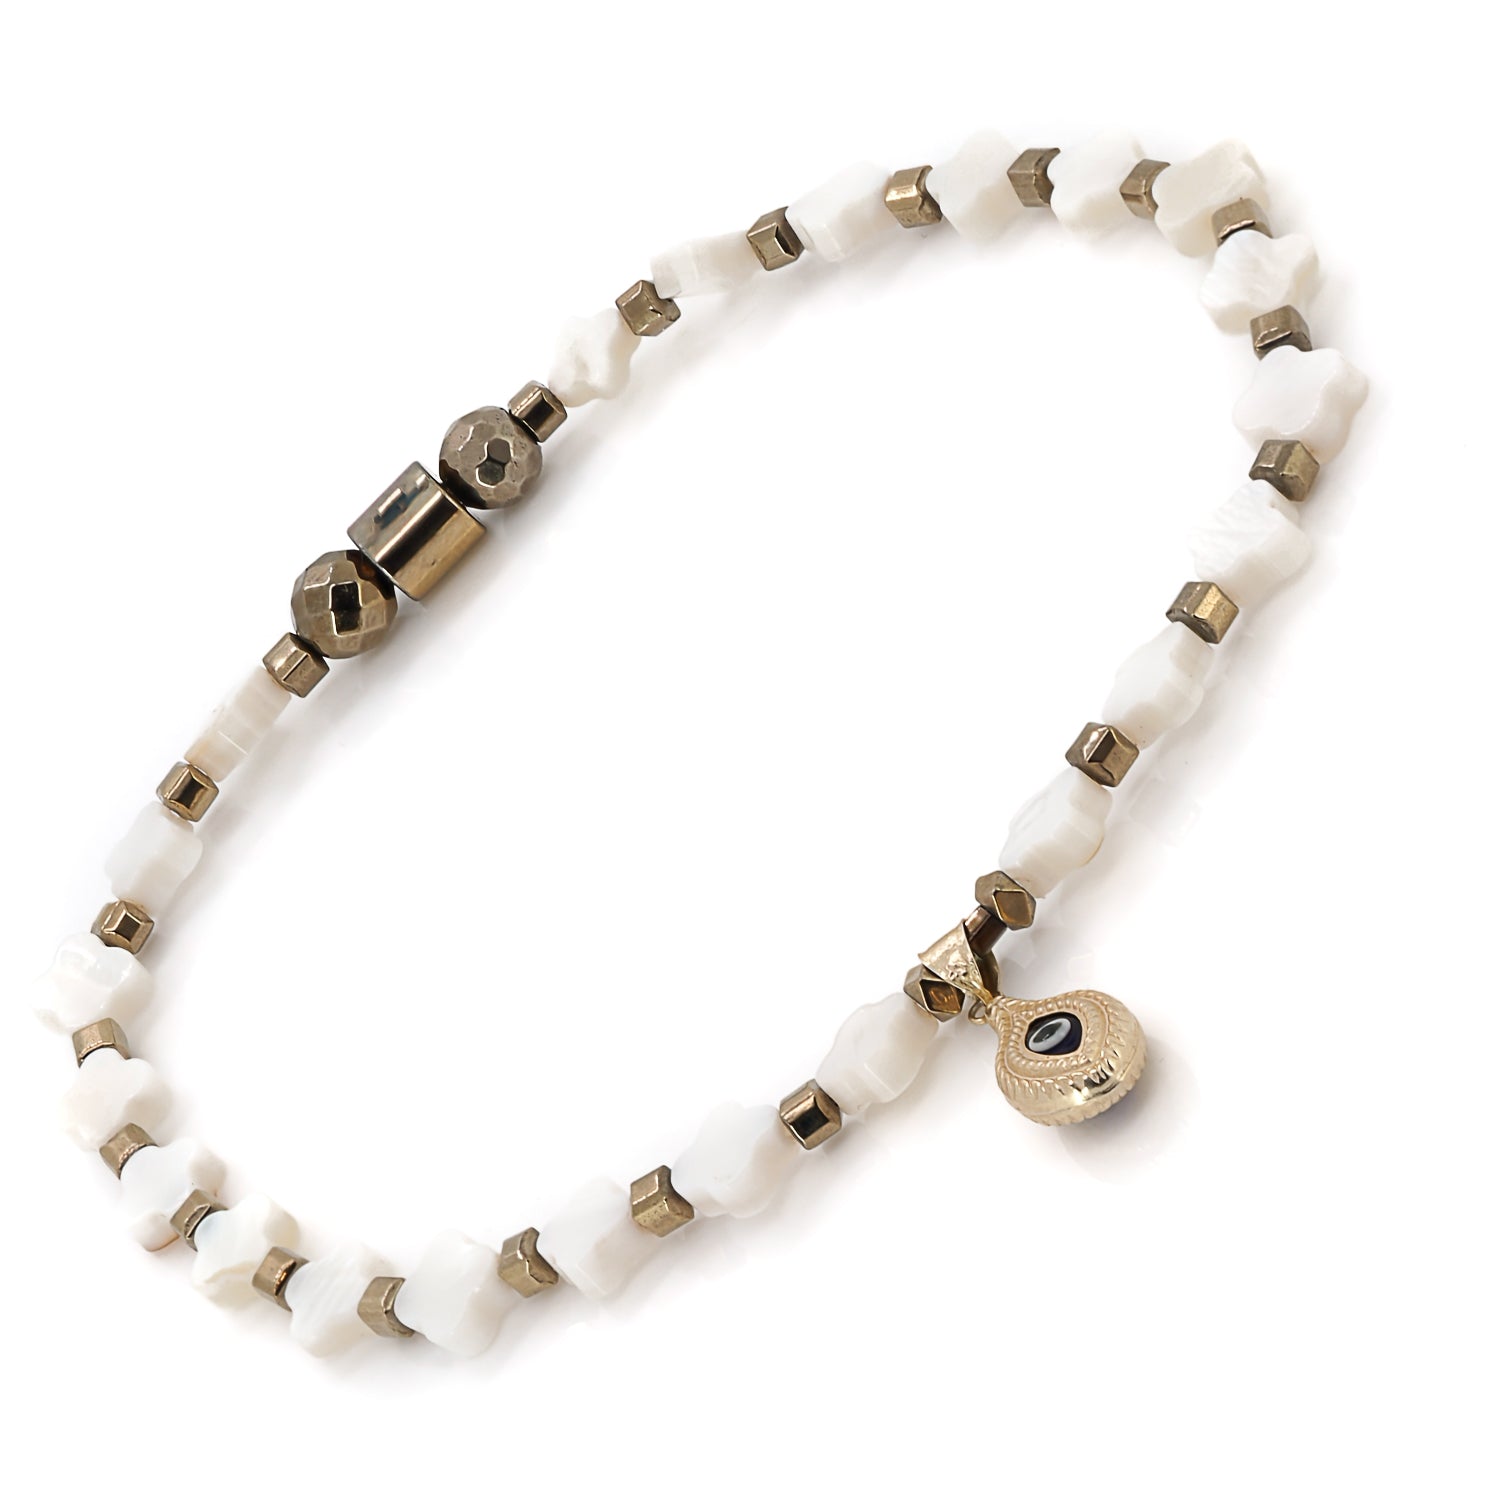 Handcrafted Beauty - Each anklet is carefully crafted by hand.